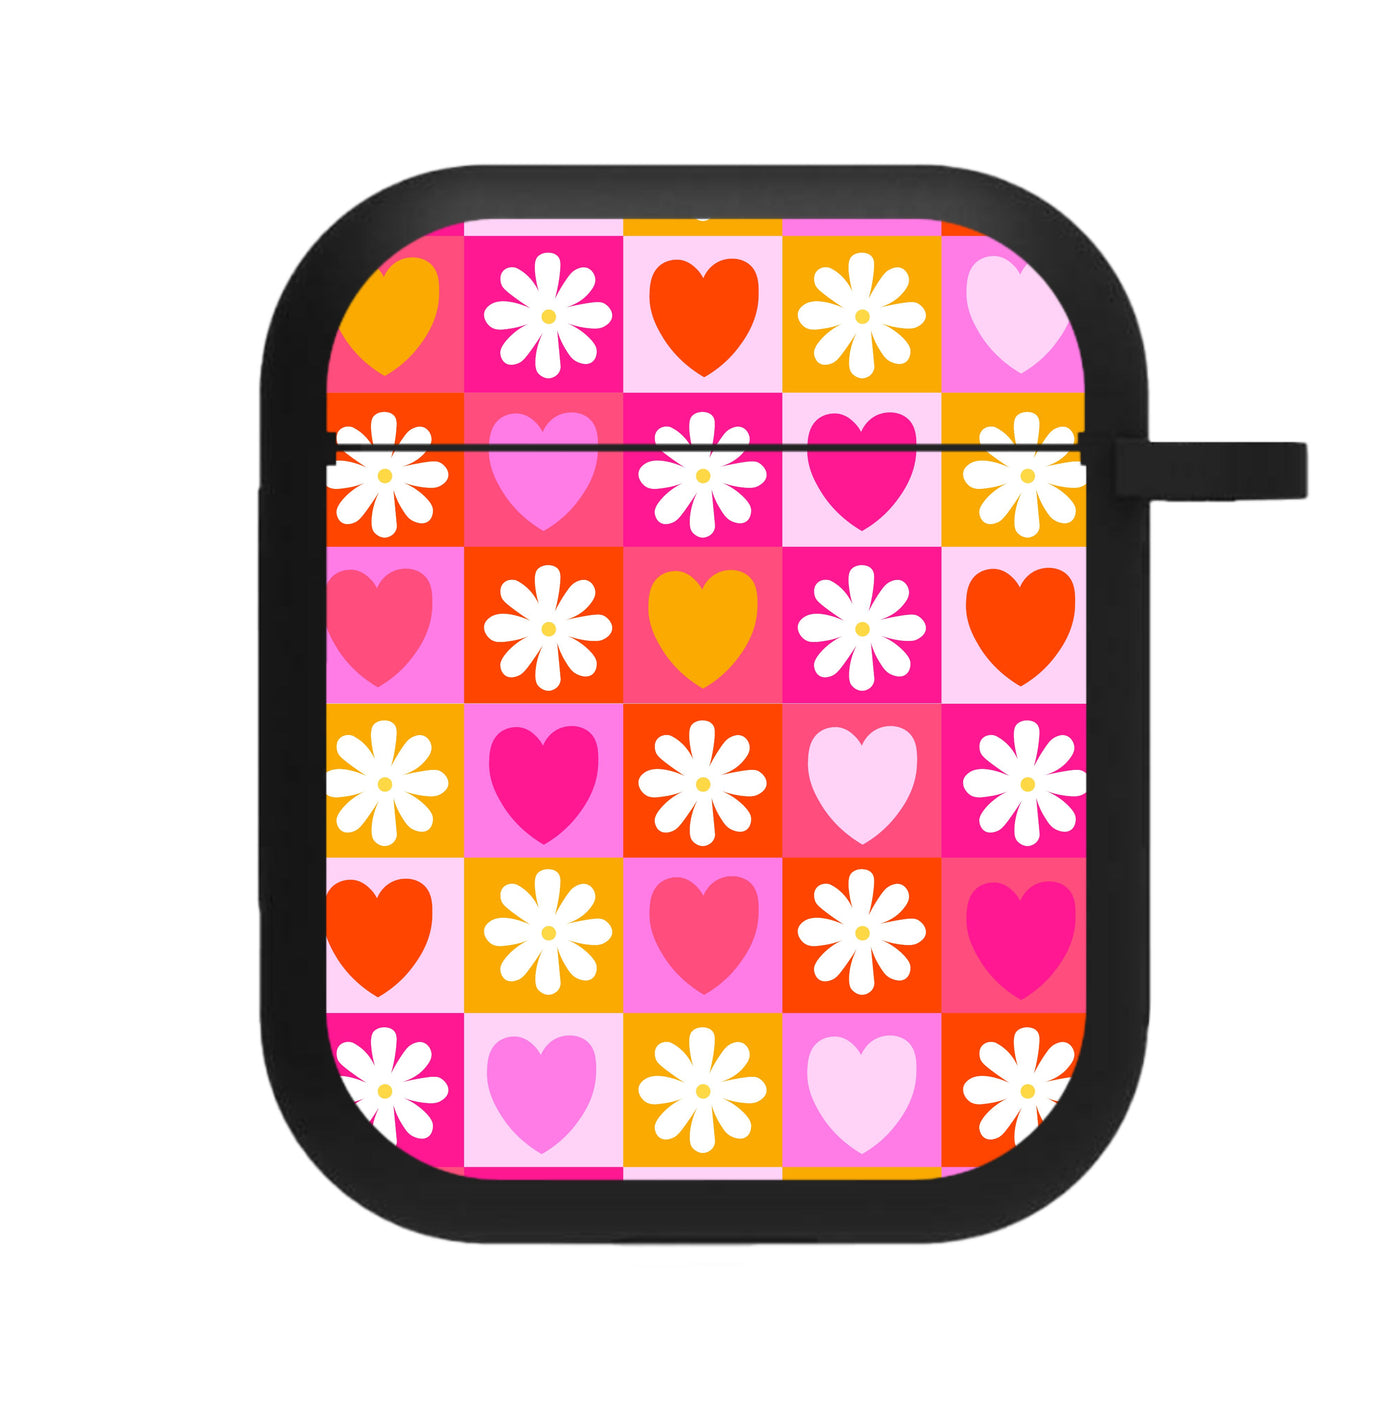 Checked Hearts And Flowers - Spring Patterns AirPods Case